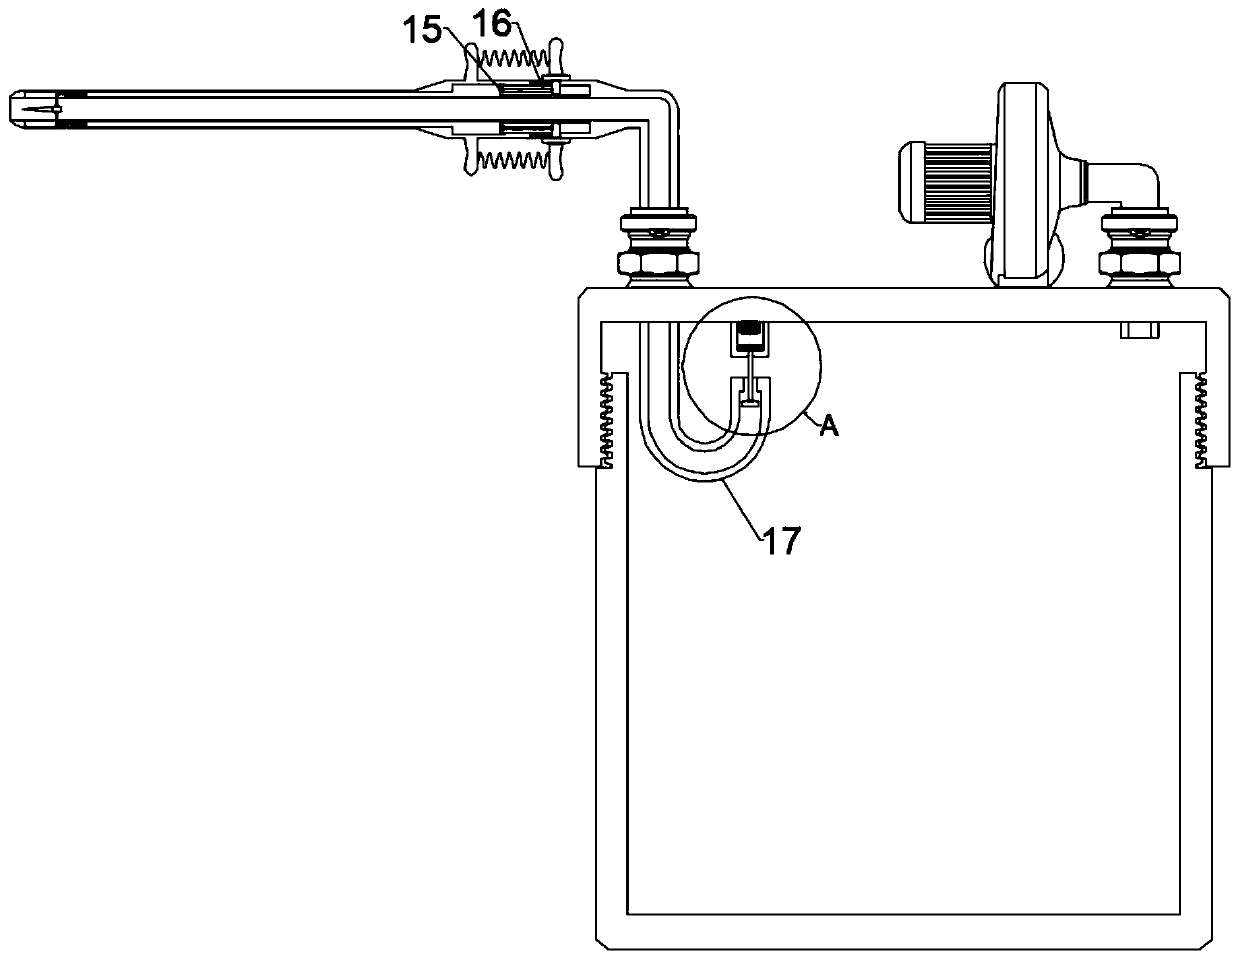 Drainage device for obstetric operation